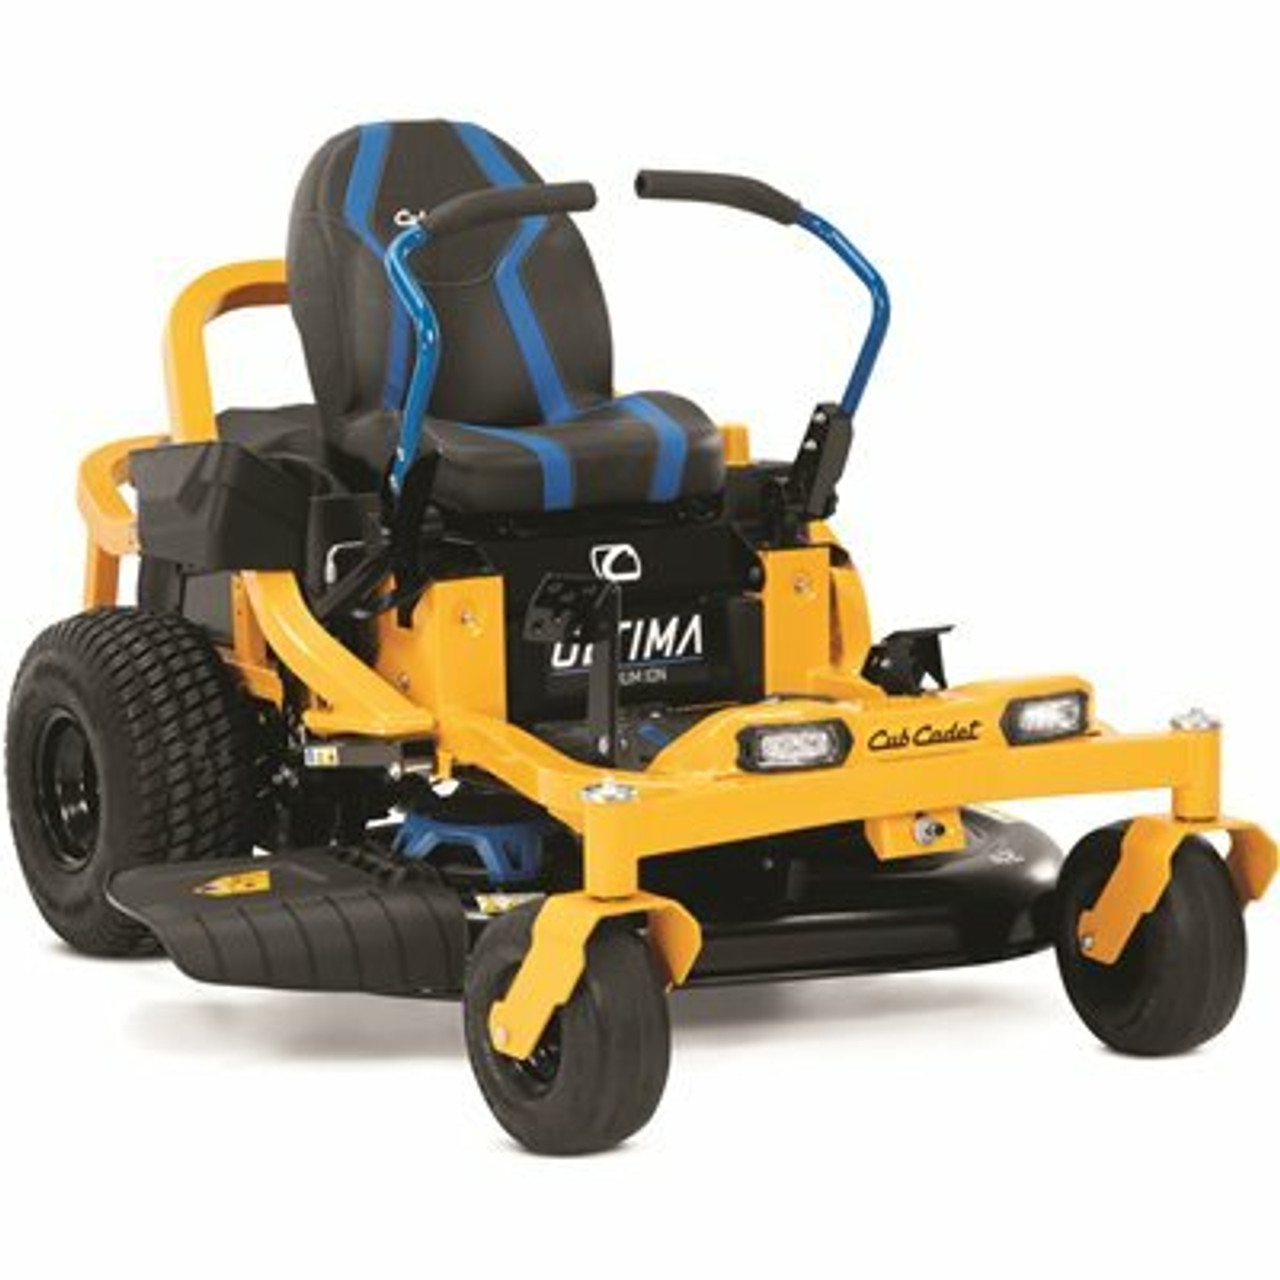 Cub Cadet Ultima Zt1 42 In. 56-Volt Max 60 Ah Battery Lithium-Ion Electric Drive Zero Turn Riding Lawn Mower